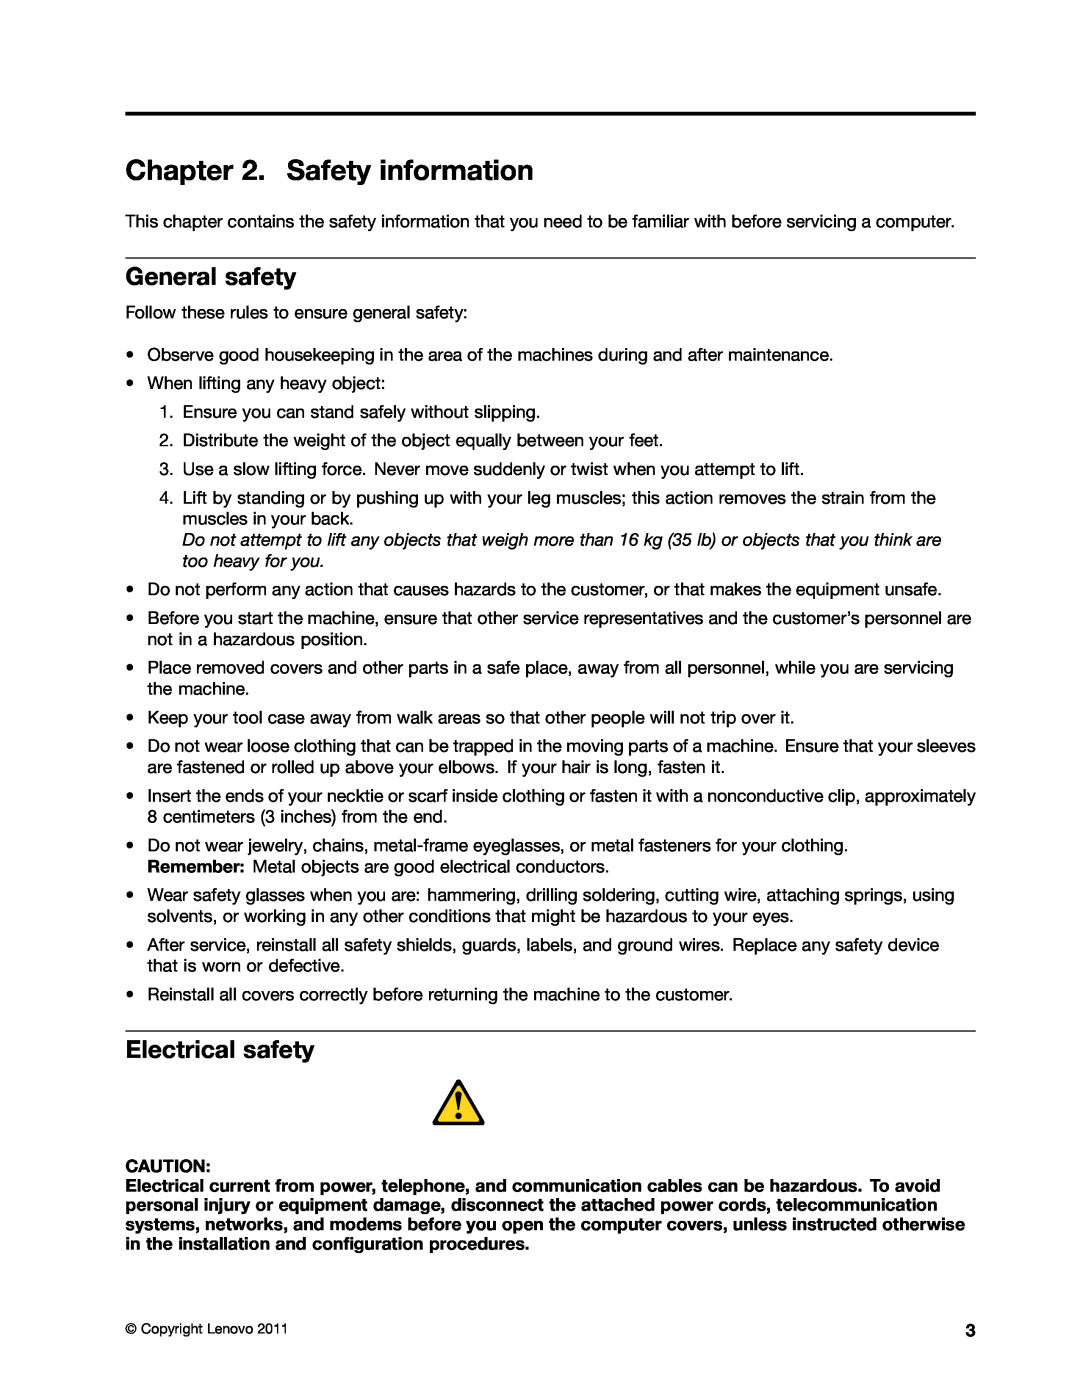 Lenovo Q180 manual Safety information, General safety, Electrical safety 